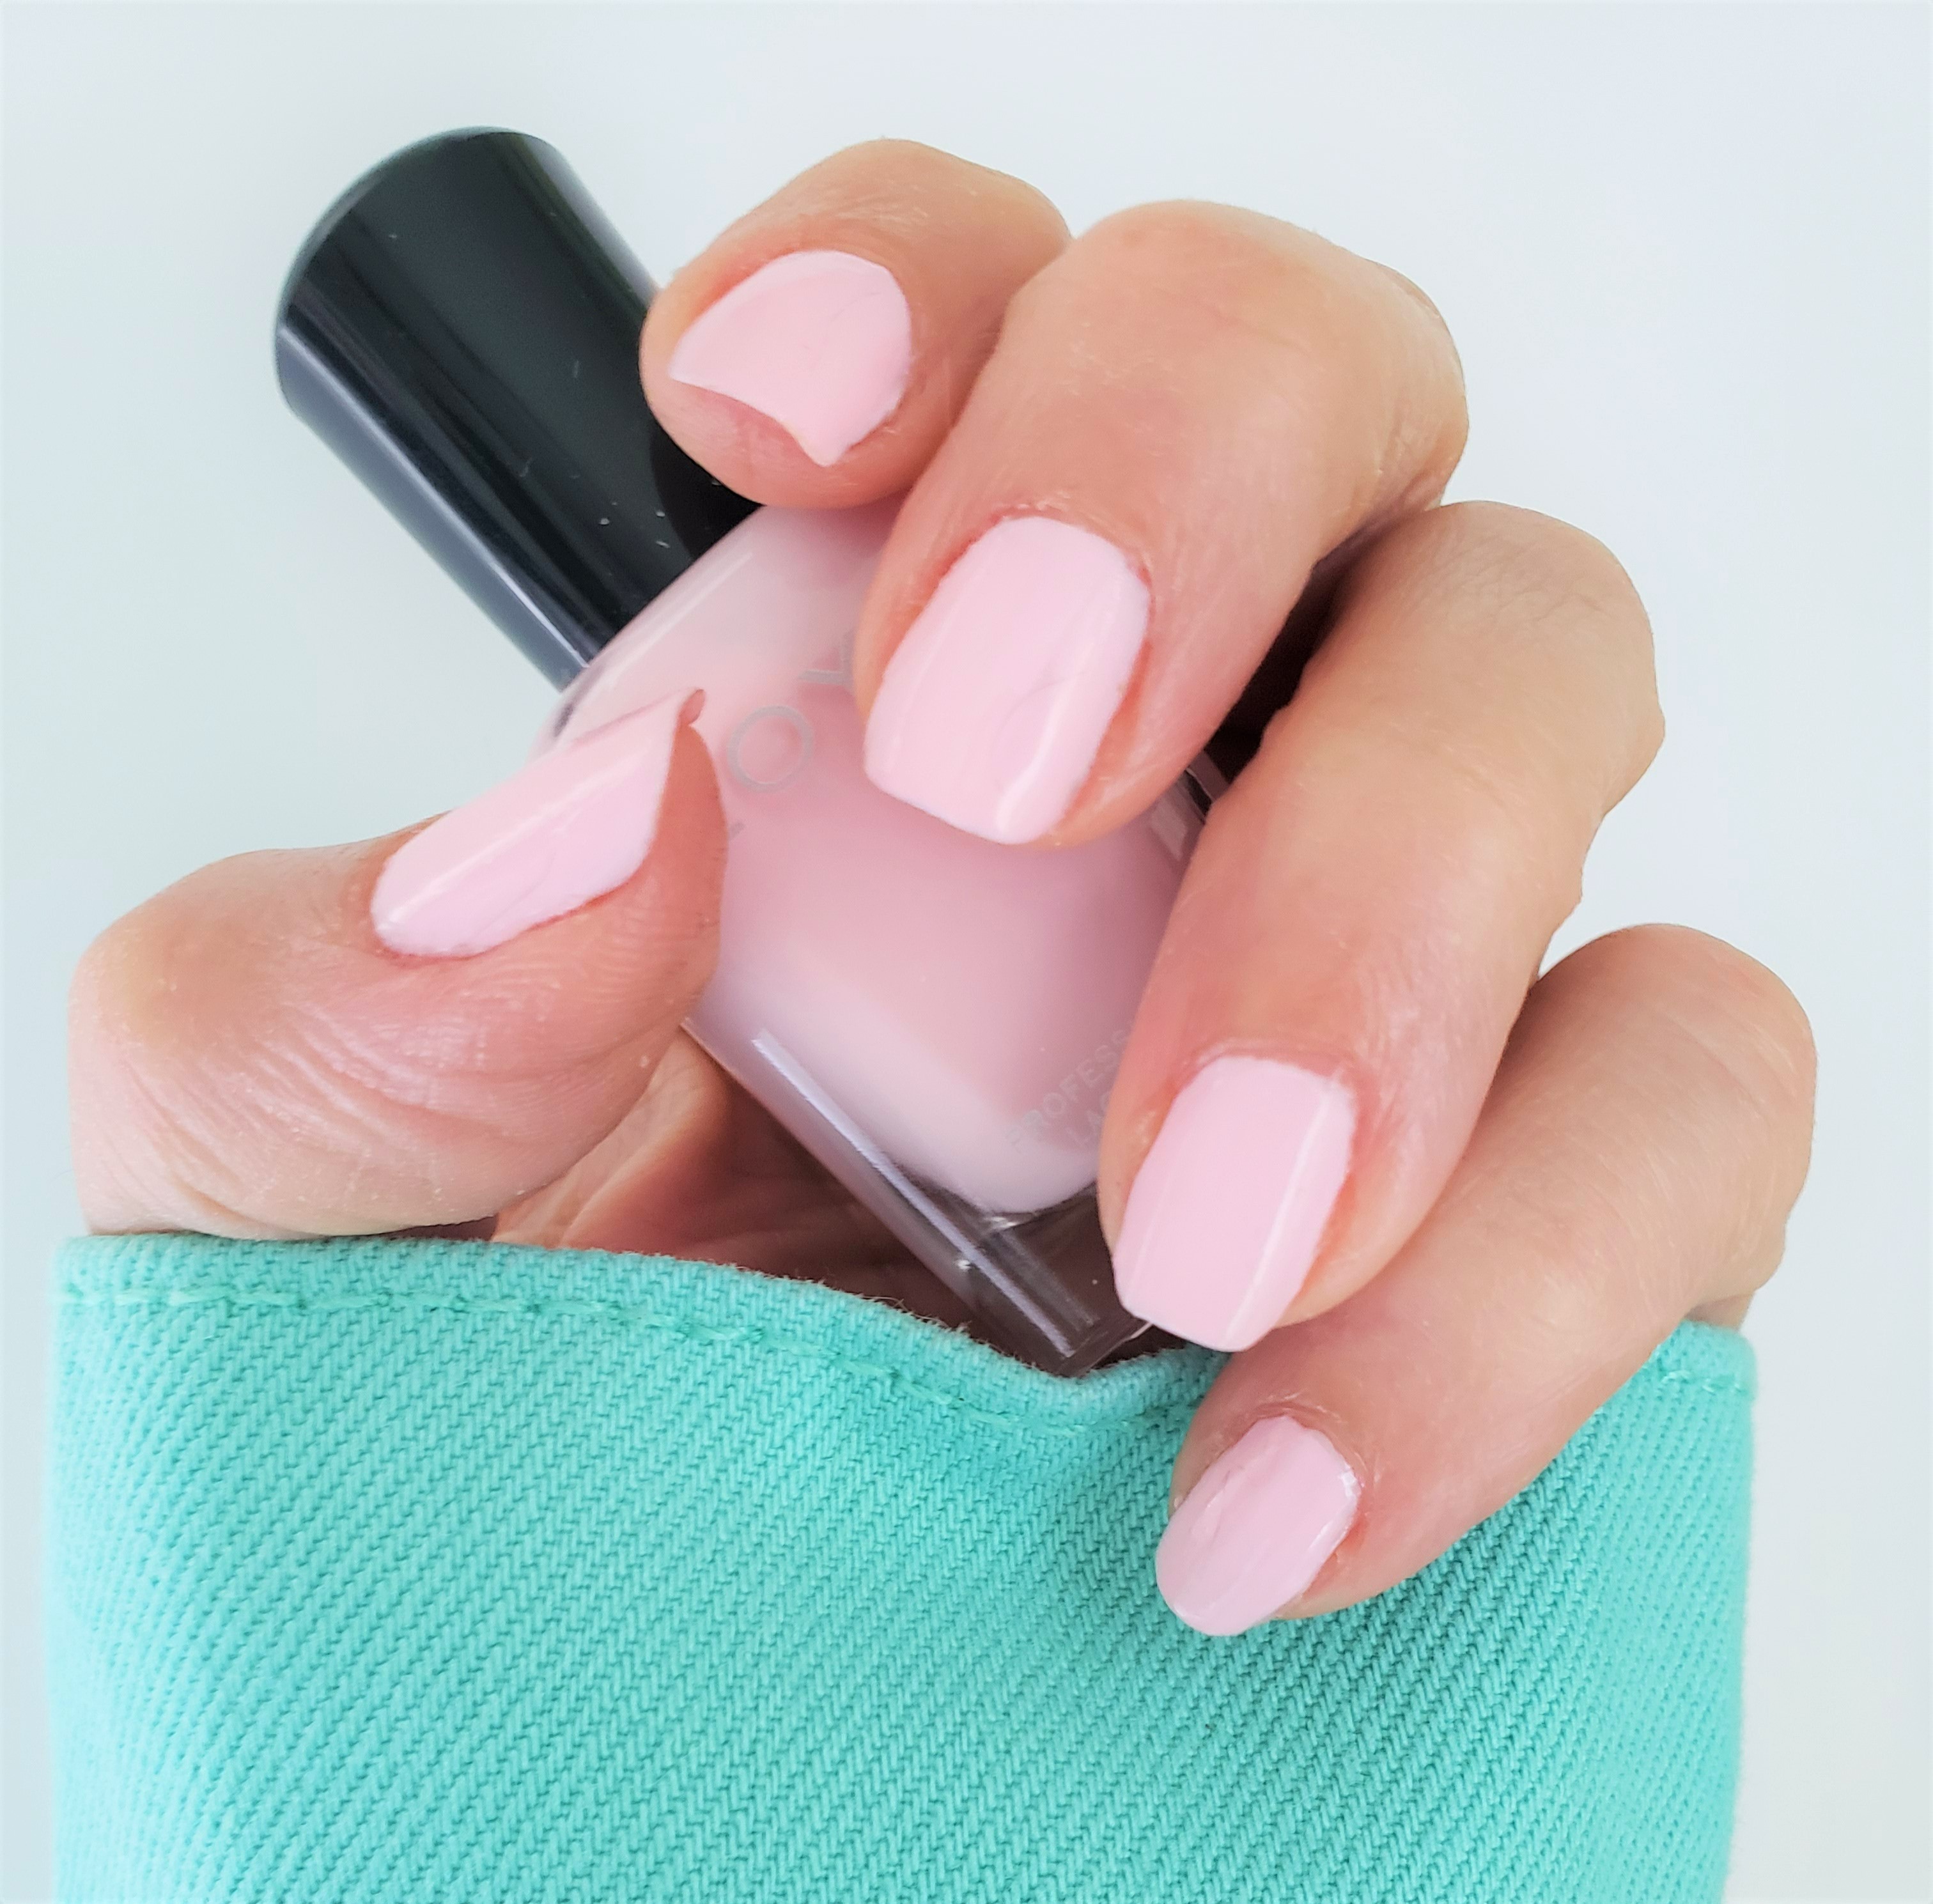 romper room - pale pink nail polish, nail color & lacquer - essie